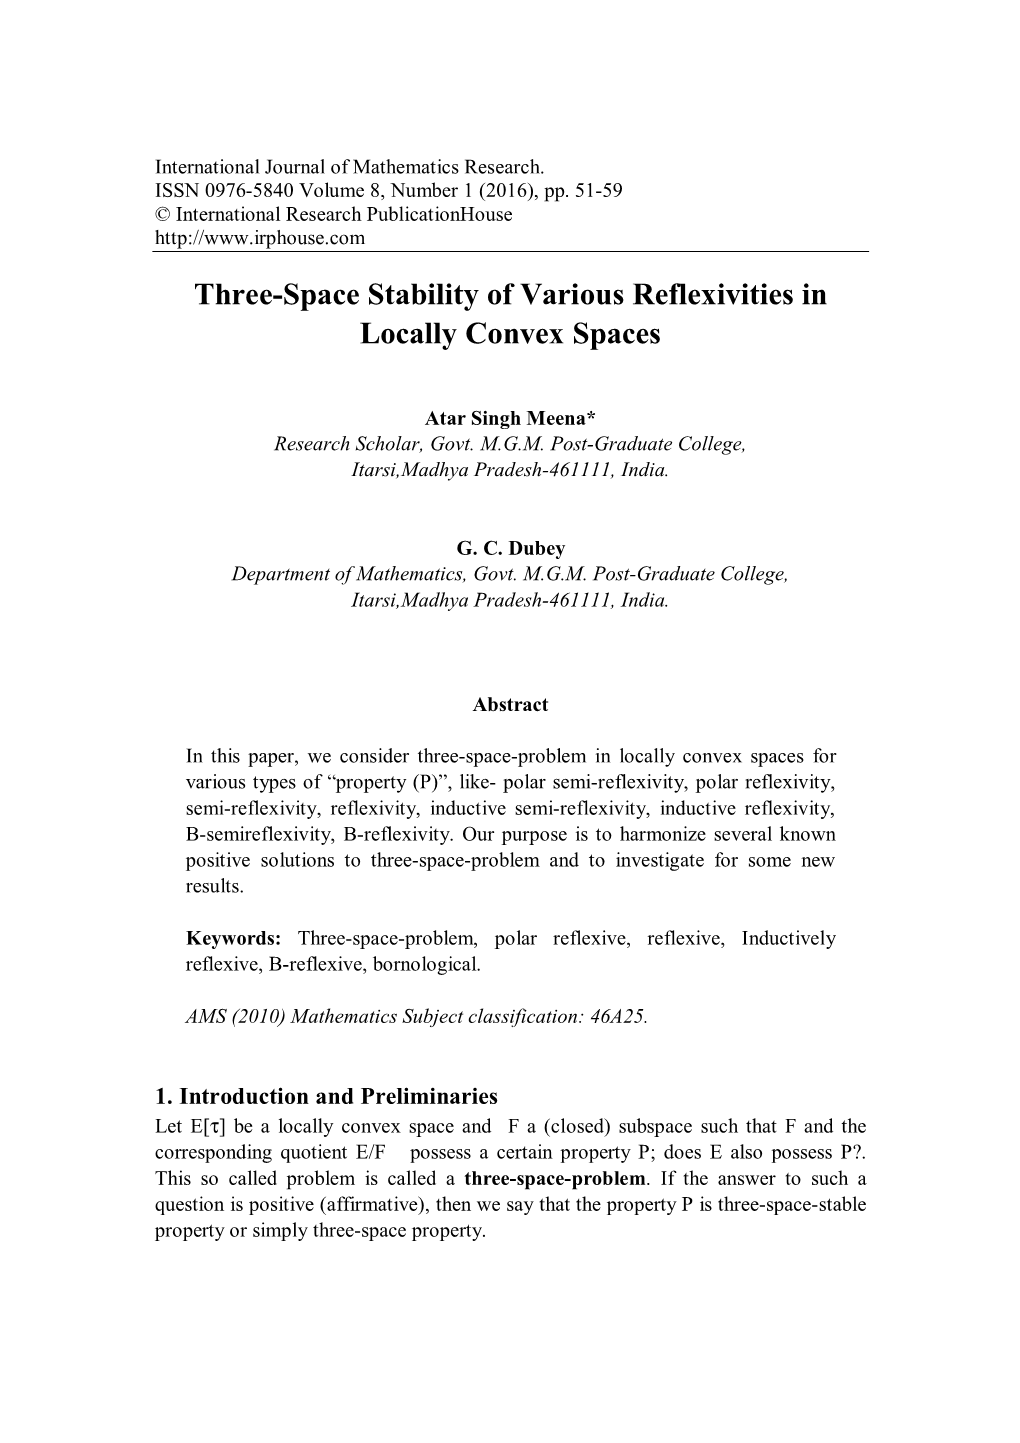 Three-Space Stability of Various Reflexivities in Locally Convex Spaces